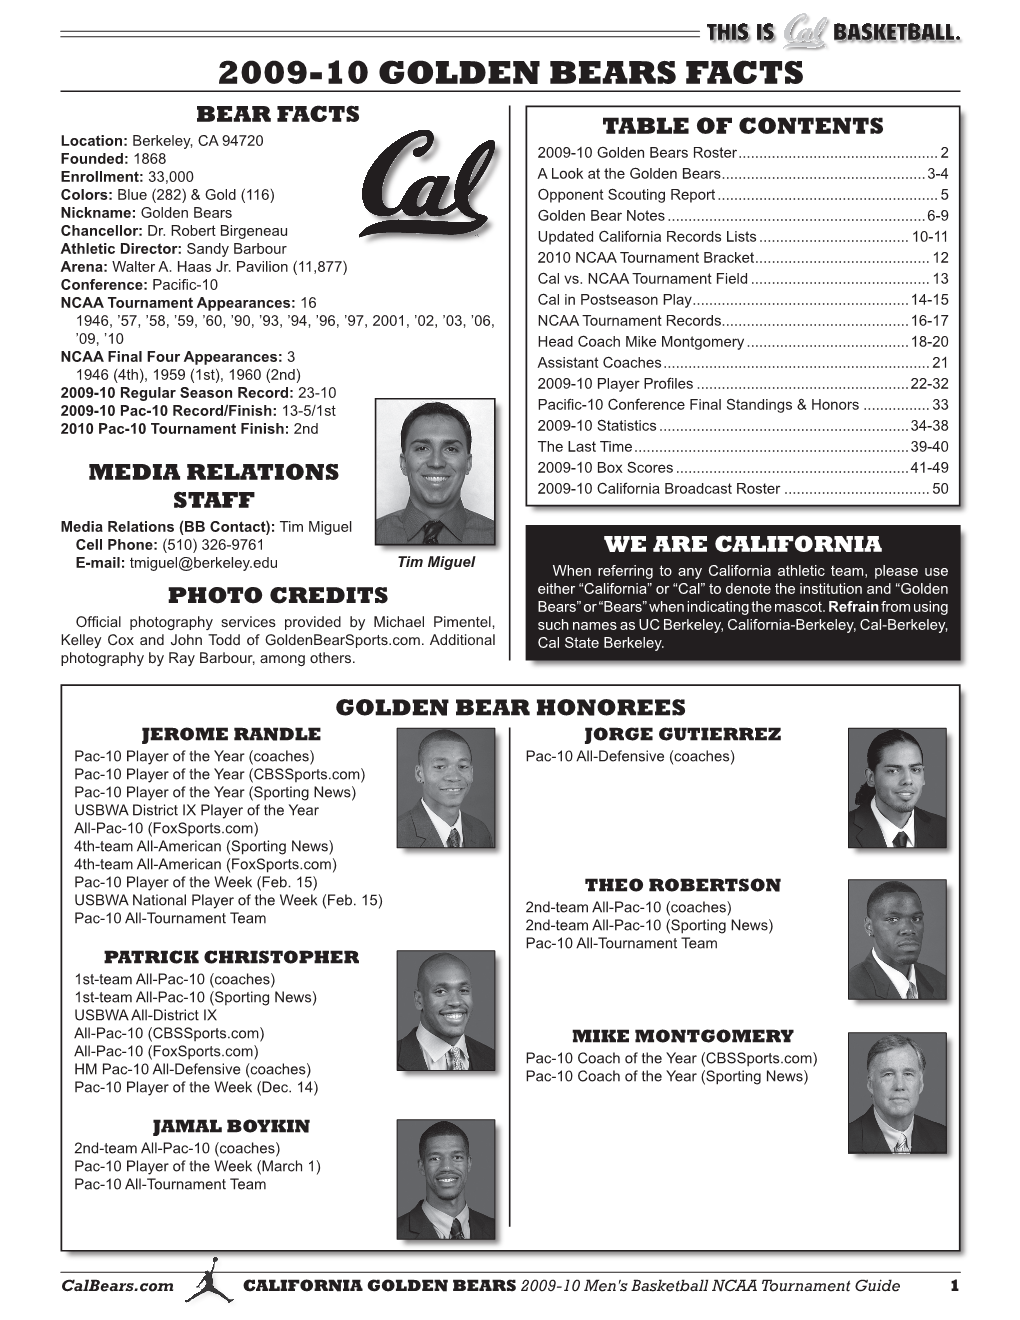 2009-10 GOLDEN BEARS FACTS BEAR FACTS TABLE of CONTENTS Location: Berkeley, CA 94720 Founded: 1868 2009-10 Golden Bears Roster